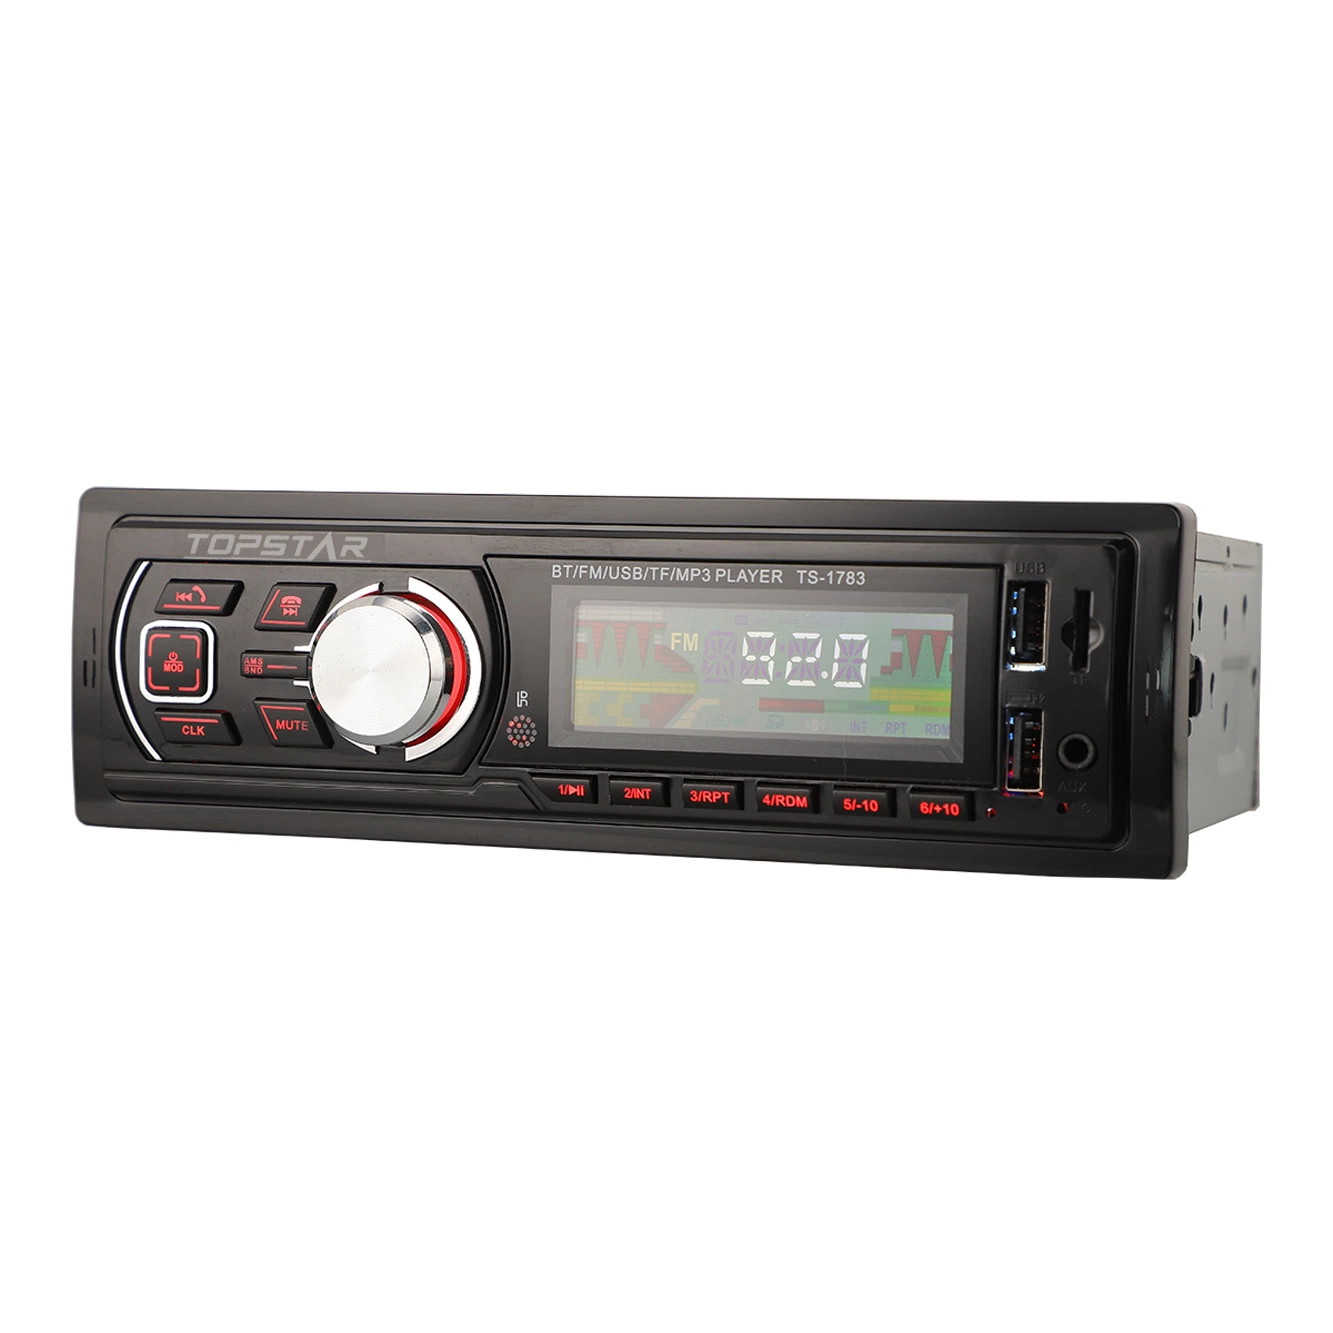 Auto Audio MP3 Player to Car Stereo Car Video Player One DIN Fixed Panel Car MP3 Player with Bluetooth Car Radio